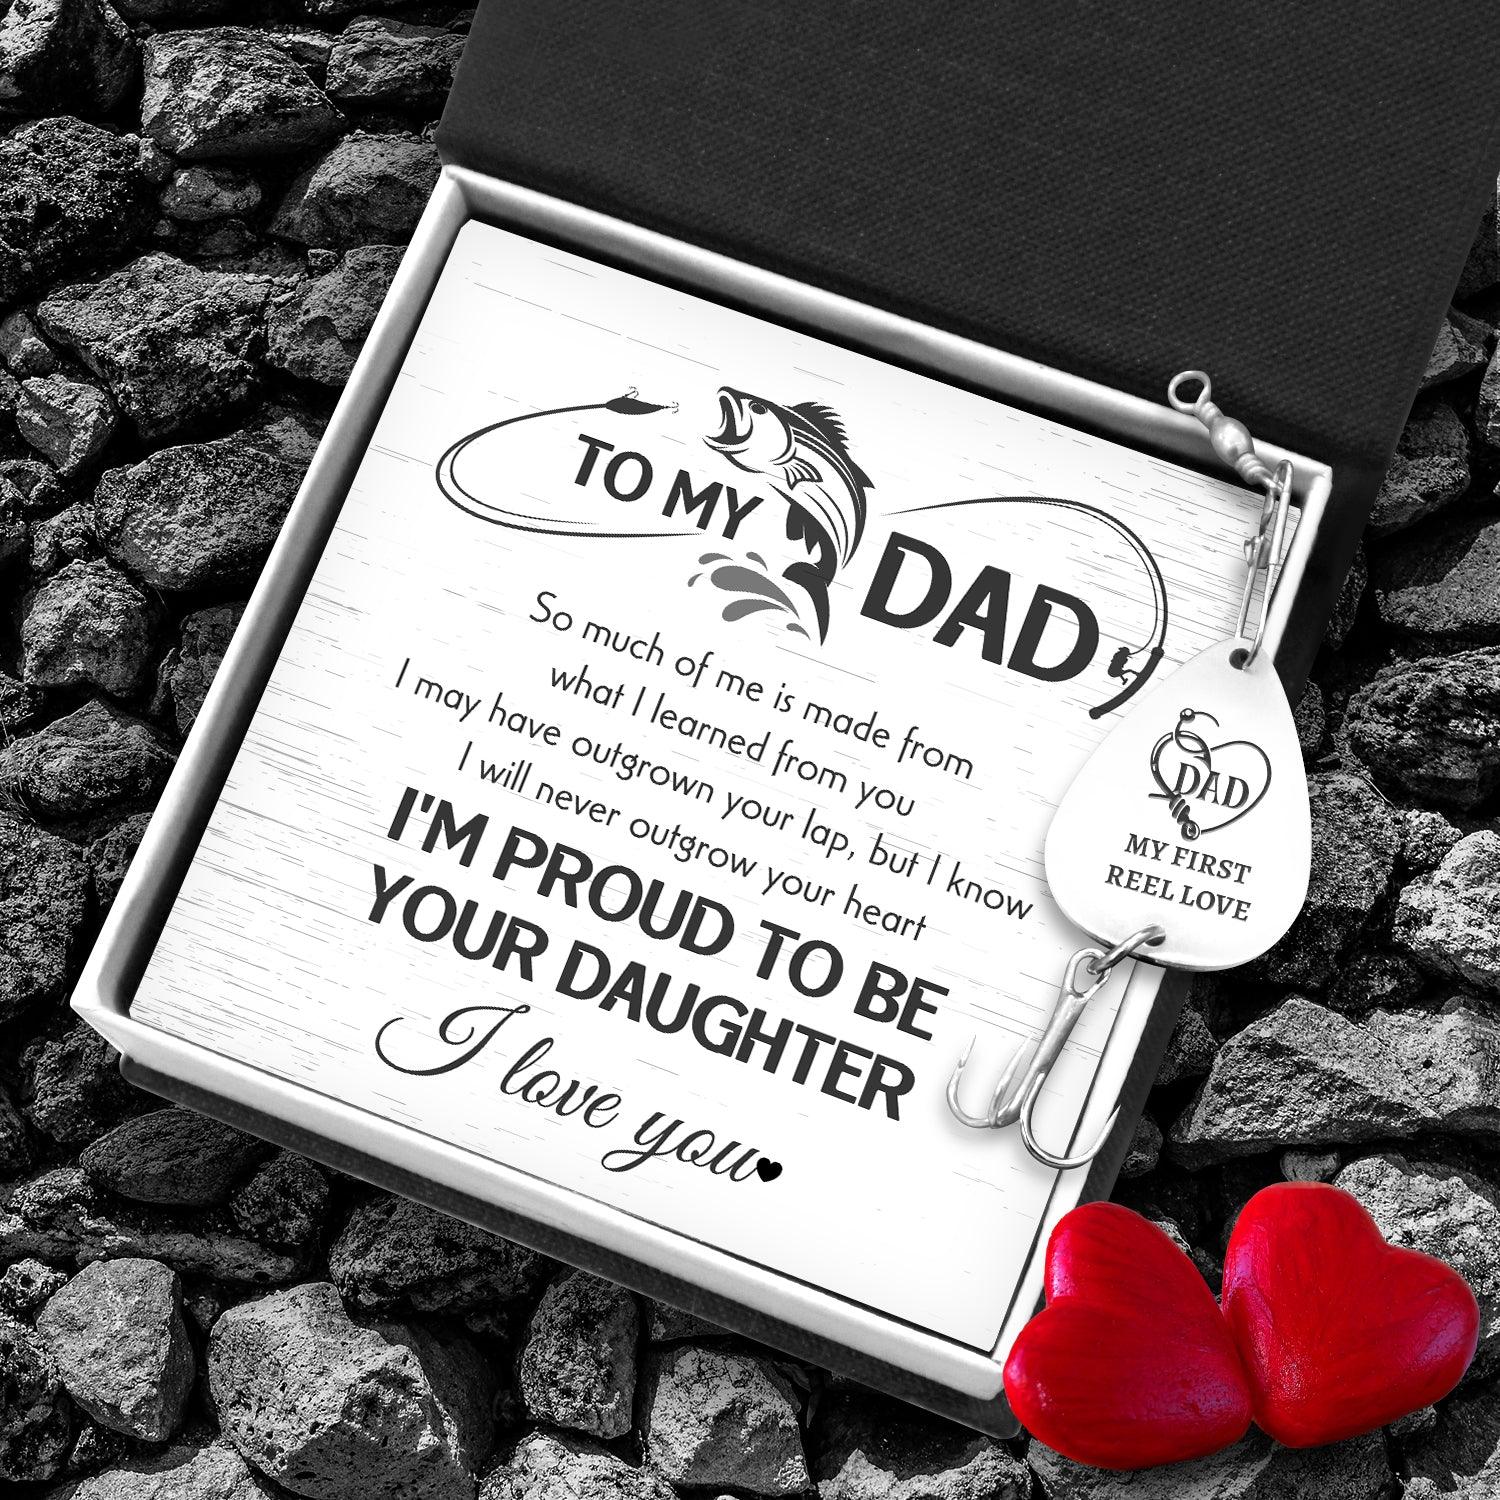 Engraved Fishing Hook - Fishing - To My Dad - I Will Never Outgrow Your Heart - Augfa18007 - Gifts Holder